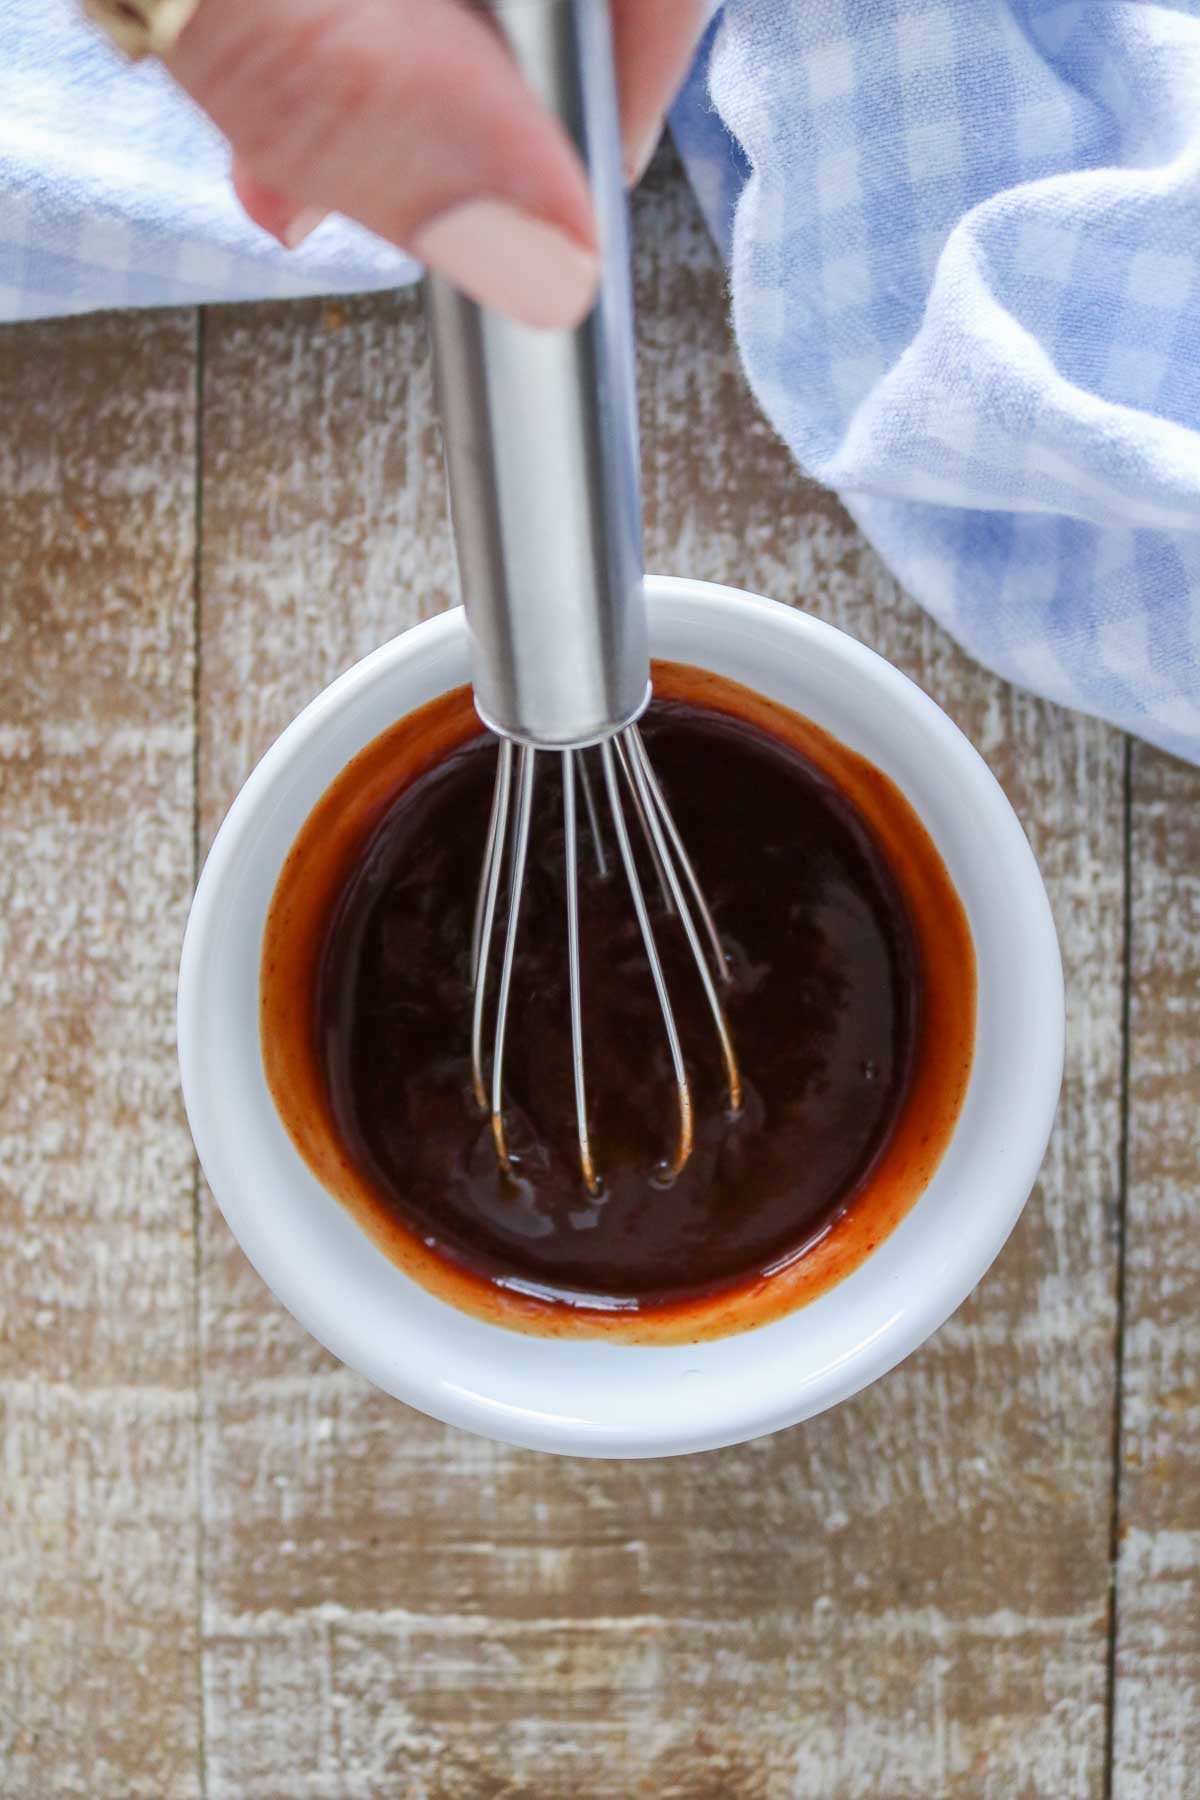 Hand holding a whisk, mixing up sauce for meatloaf in a bowl.